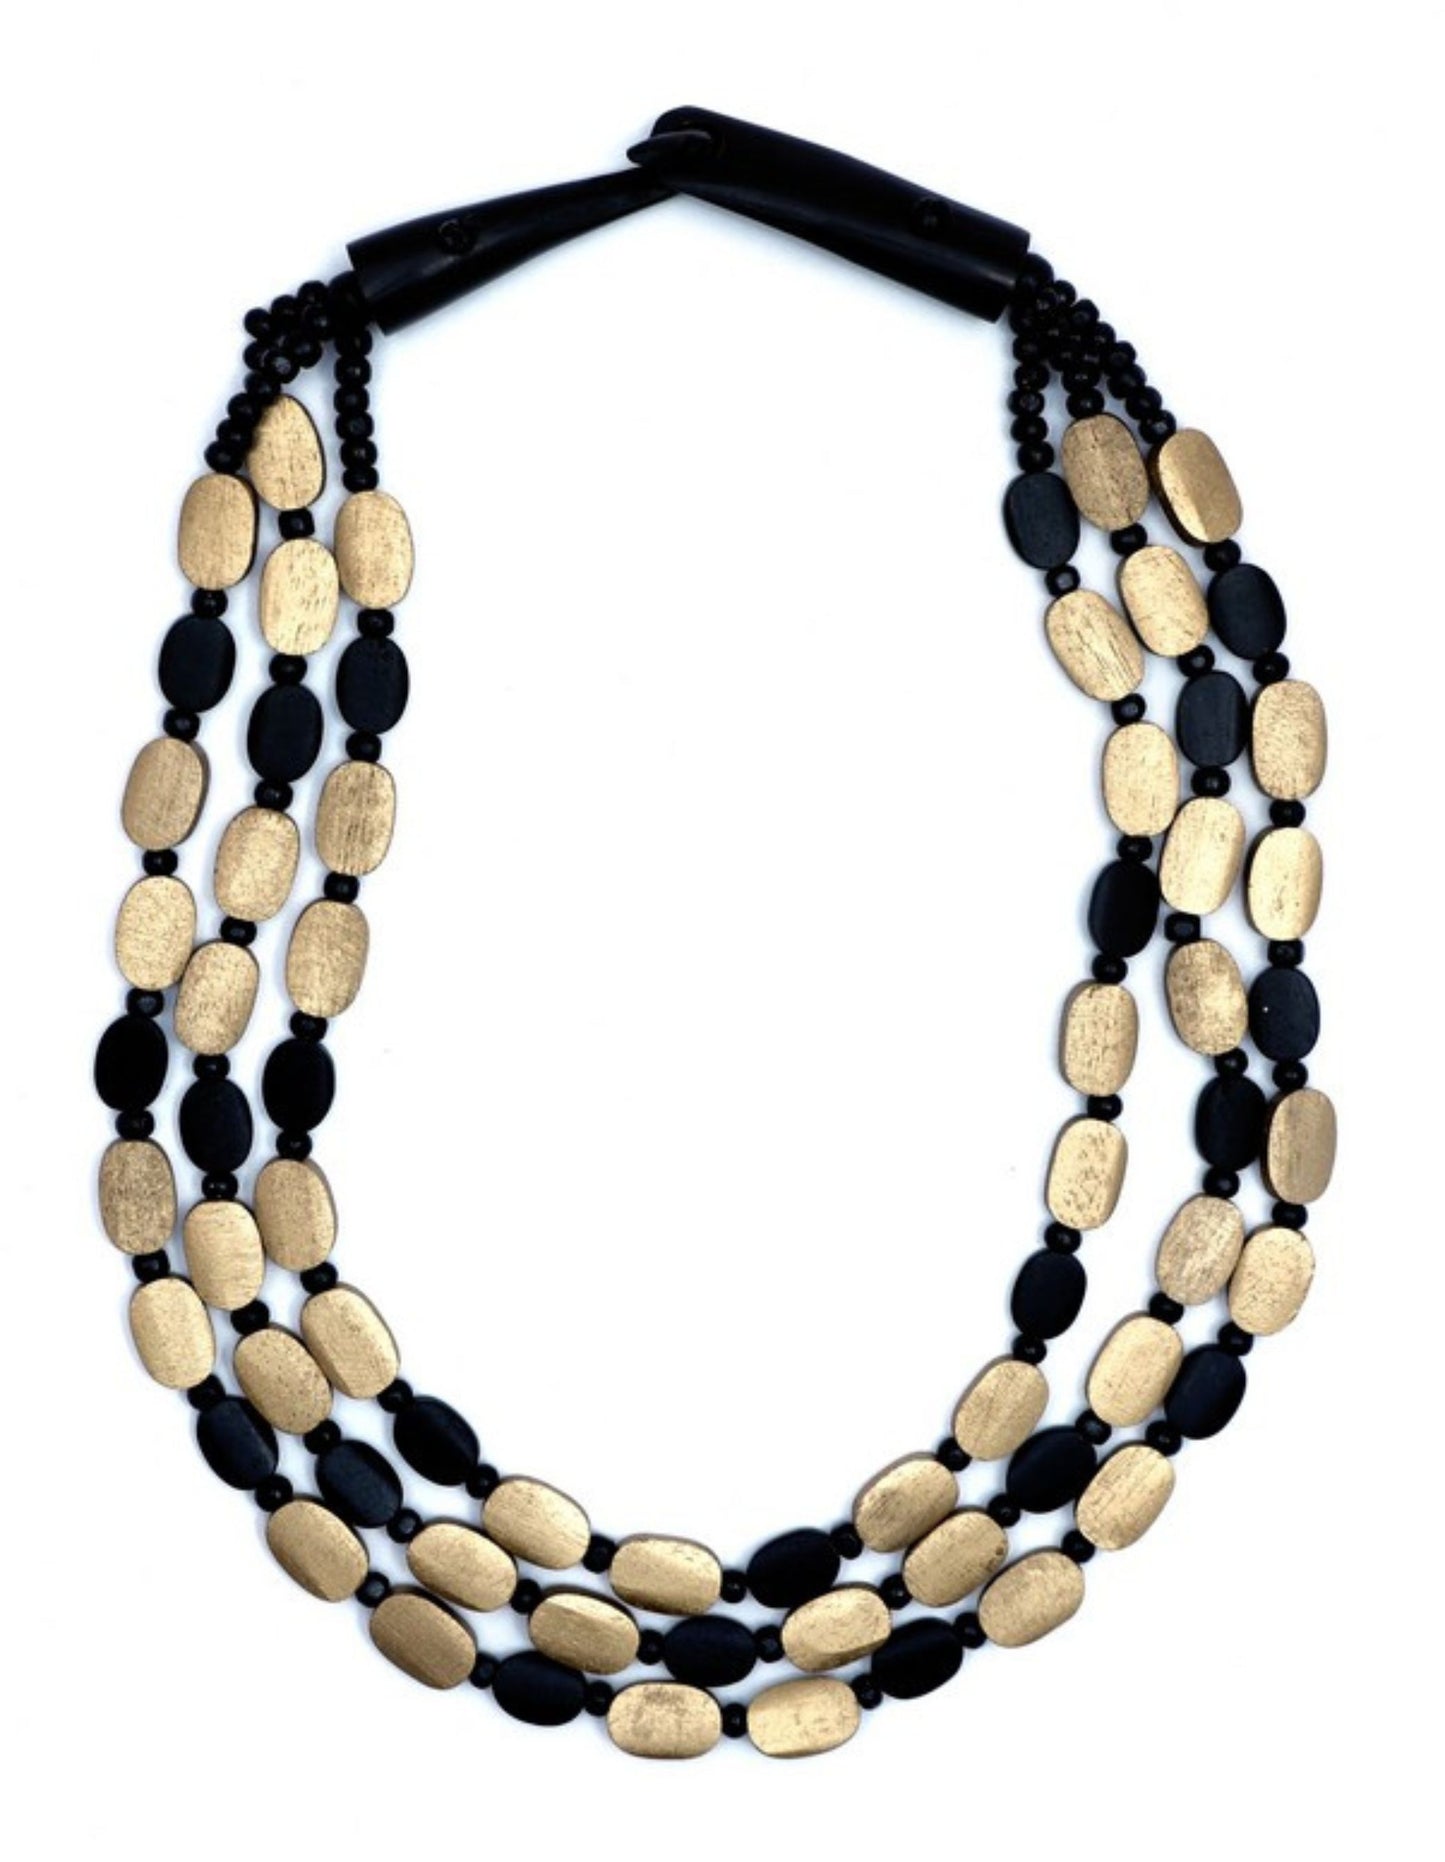 3 layer golden & black color beads Necklace